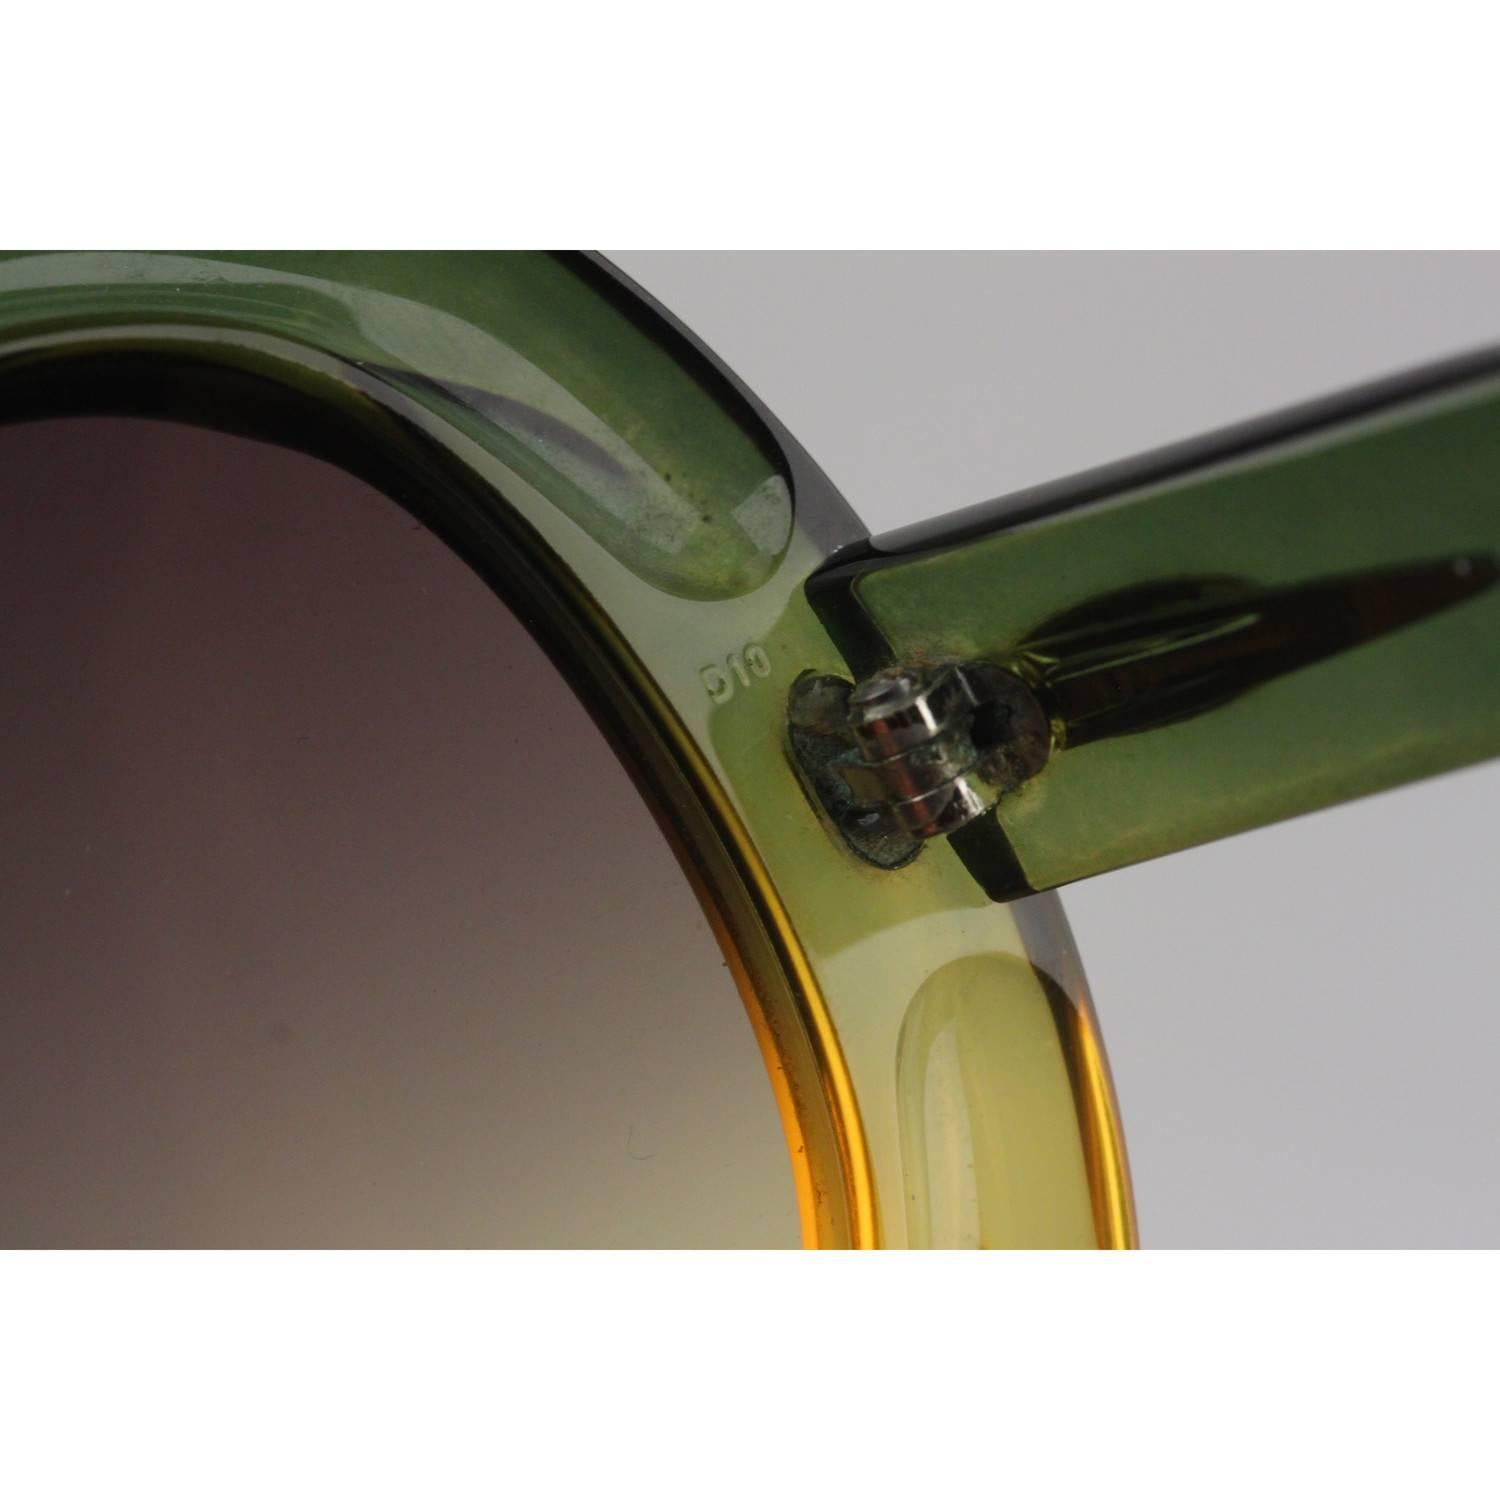 - Supreme, Spectacular Oversized Shades by CHRISTIAN DIOR
- Entirely handmade, a work of art
- Beautiful semi-transparent bi-color (green and yellow) OPTYL / Acetate frame, with gradient & bi-color lens (from blue to yellow)
- MINT / EXCELLENT